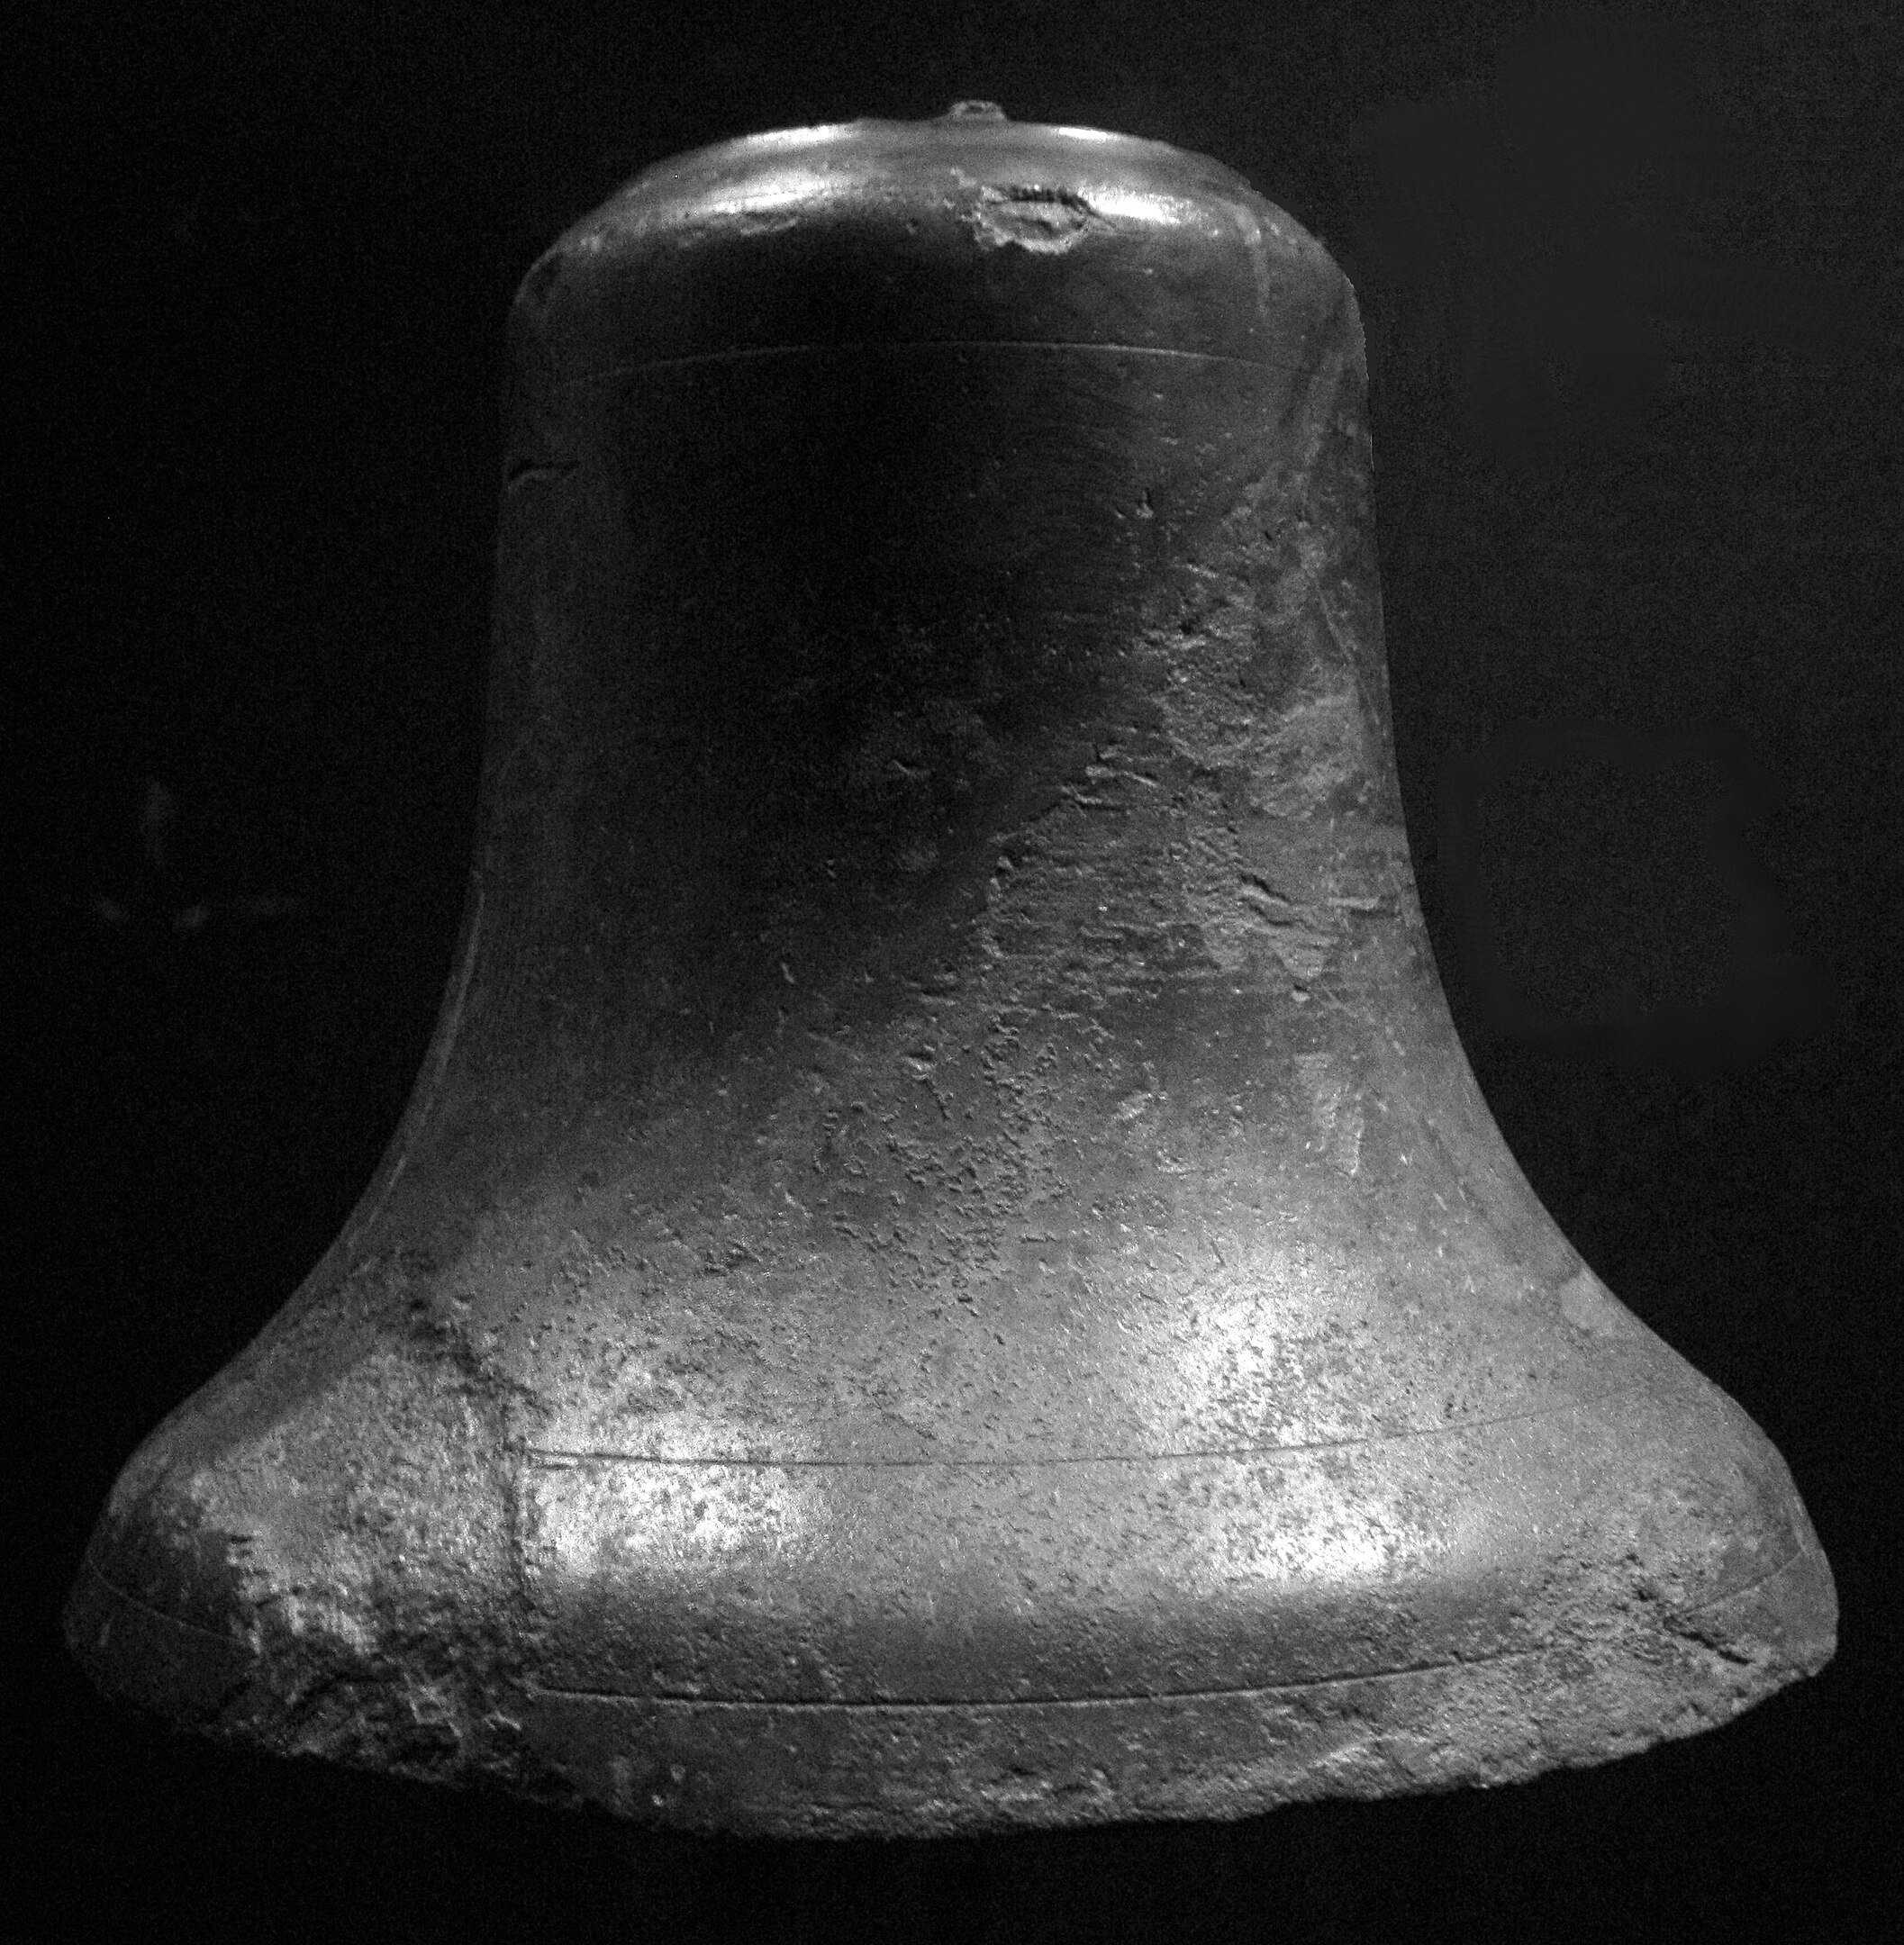 <p>Recovered from the wreck of the Titanic is the ship’s bell. It’s this bell that would have been rung to alert many crew members on deck of the impending hit with the iceberg. For the most part, the bell was well-preserved when it was brought to the surface. </p><p><span>Would you please let us know what you think about our content? <p>Agree? Tell us by clicking the “Thumbs Up” button above.</p> Disagree? Leave a comment telling us what you’d change.</span></p>